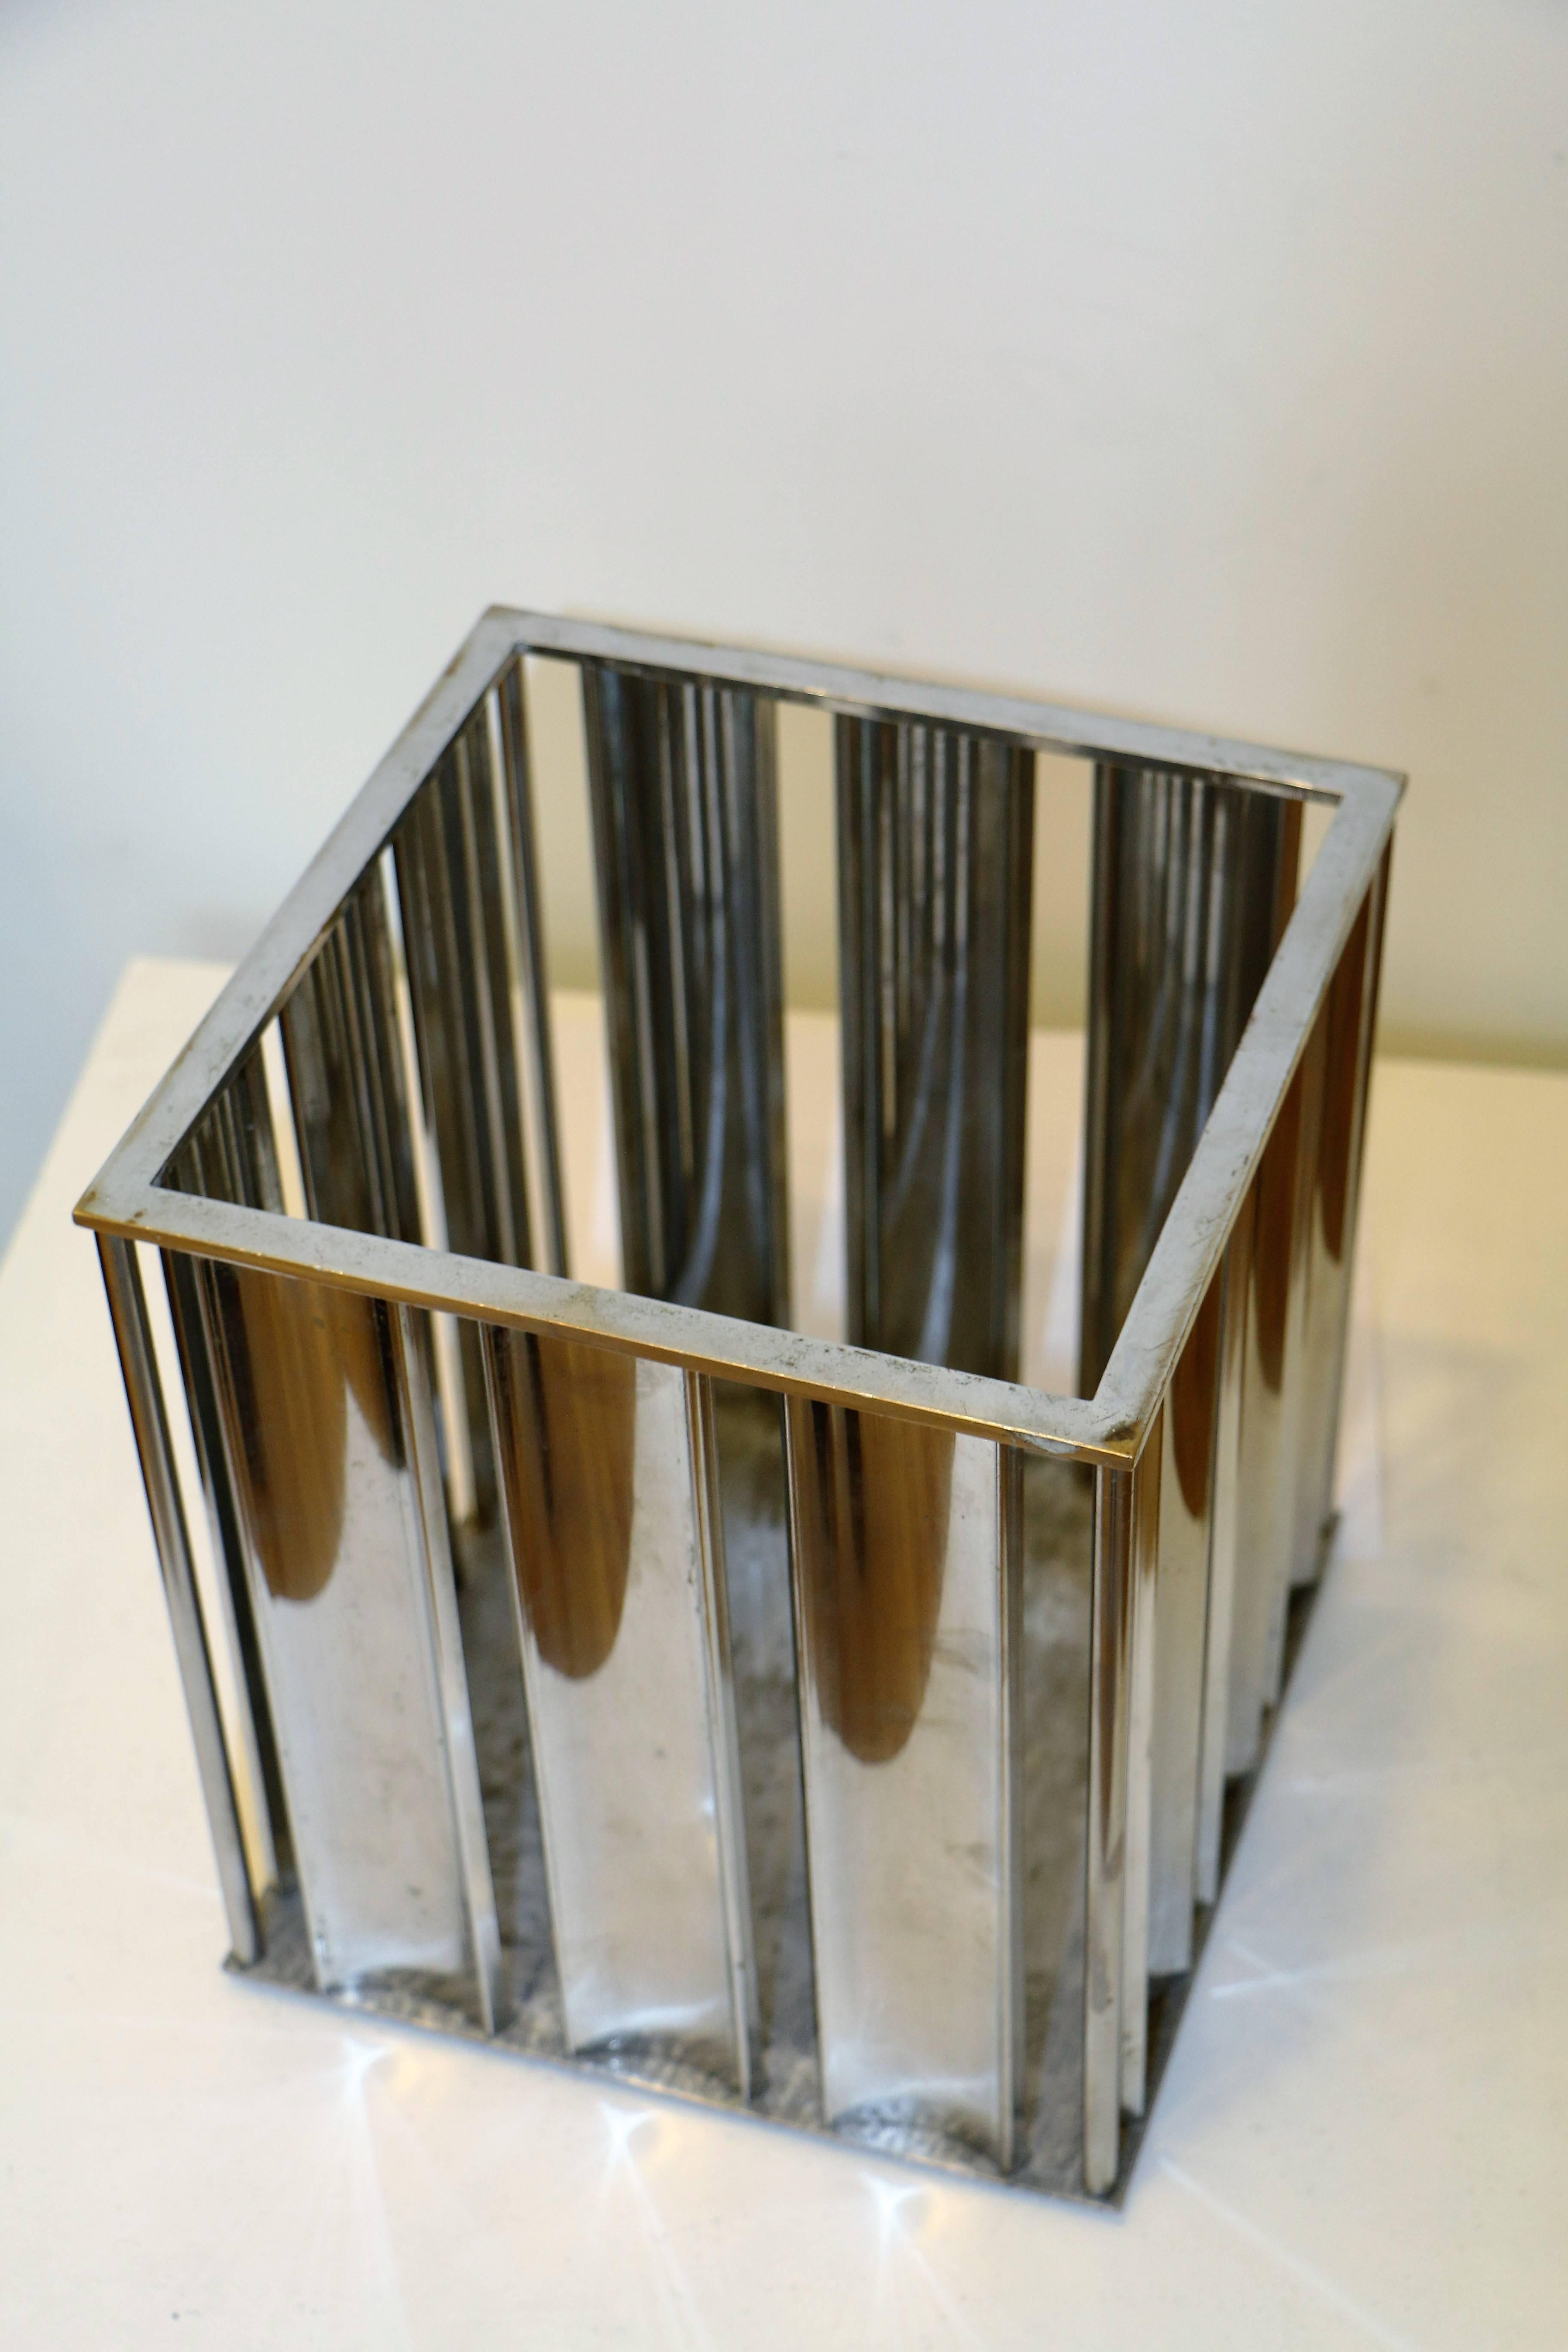 This wastepaper basket was designed by Jacques Adnet (1901-1984) circa 1930. The body is made of chromed brass plates. This is a stunning example of French modernist design by the leading Art Deco French designer.